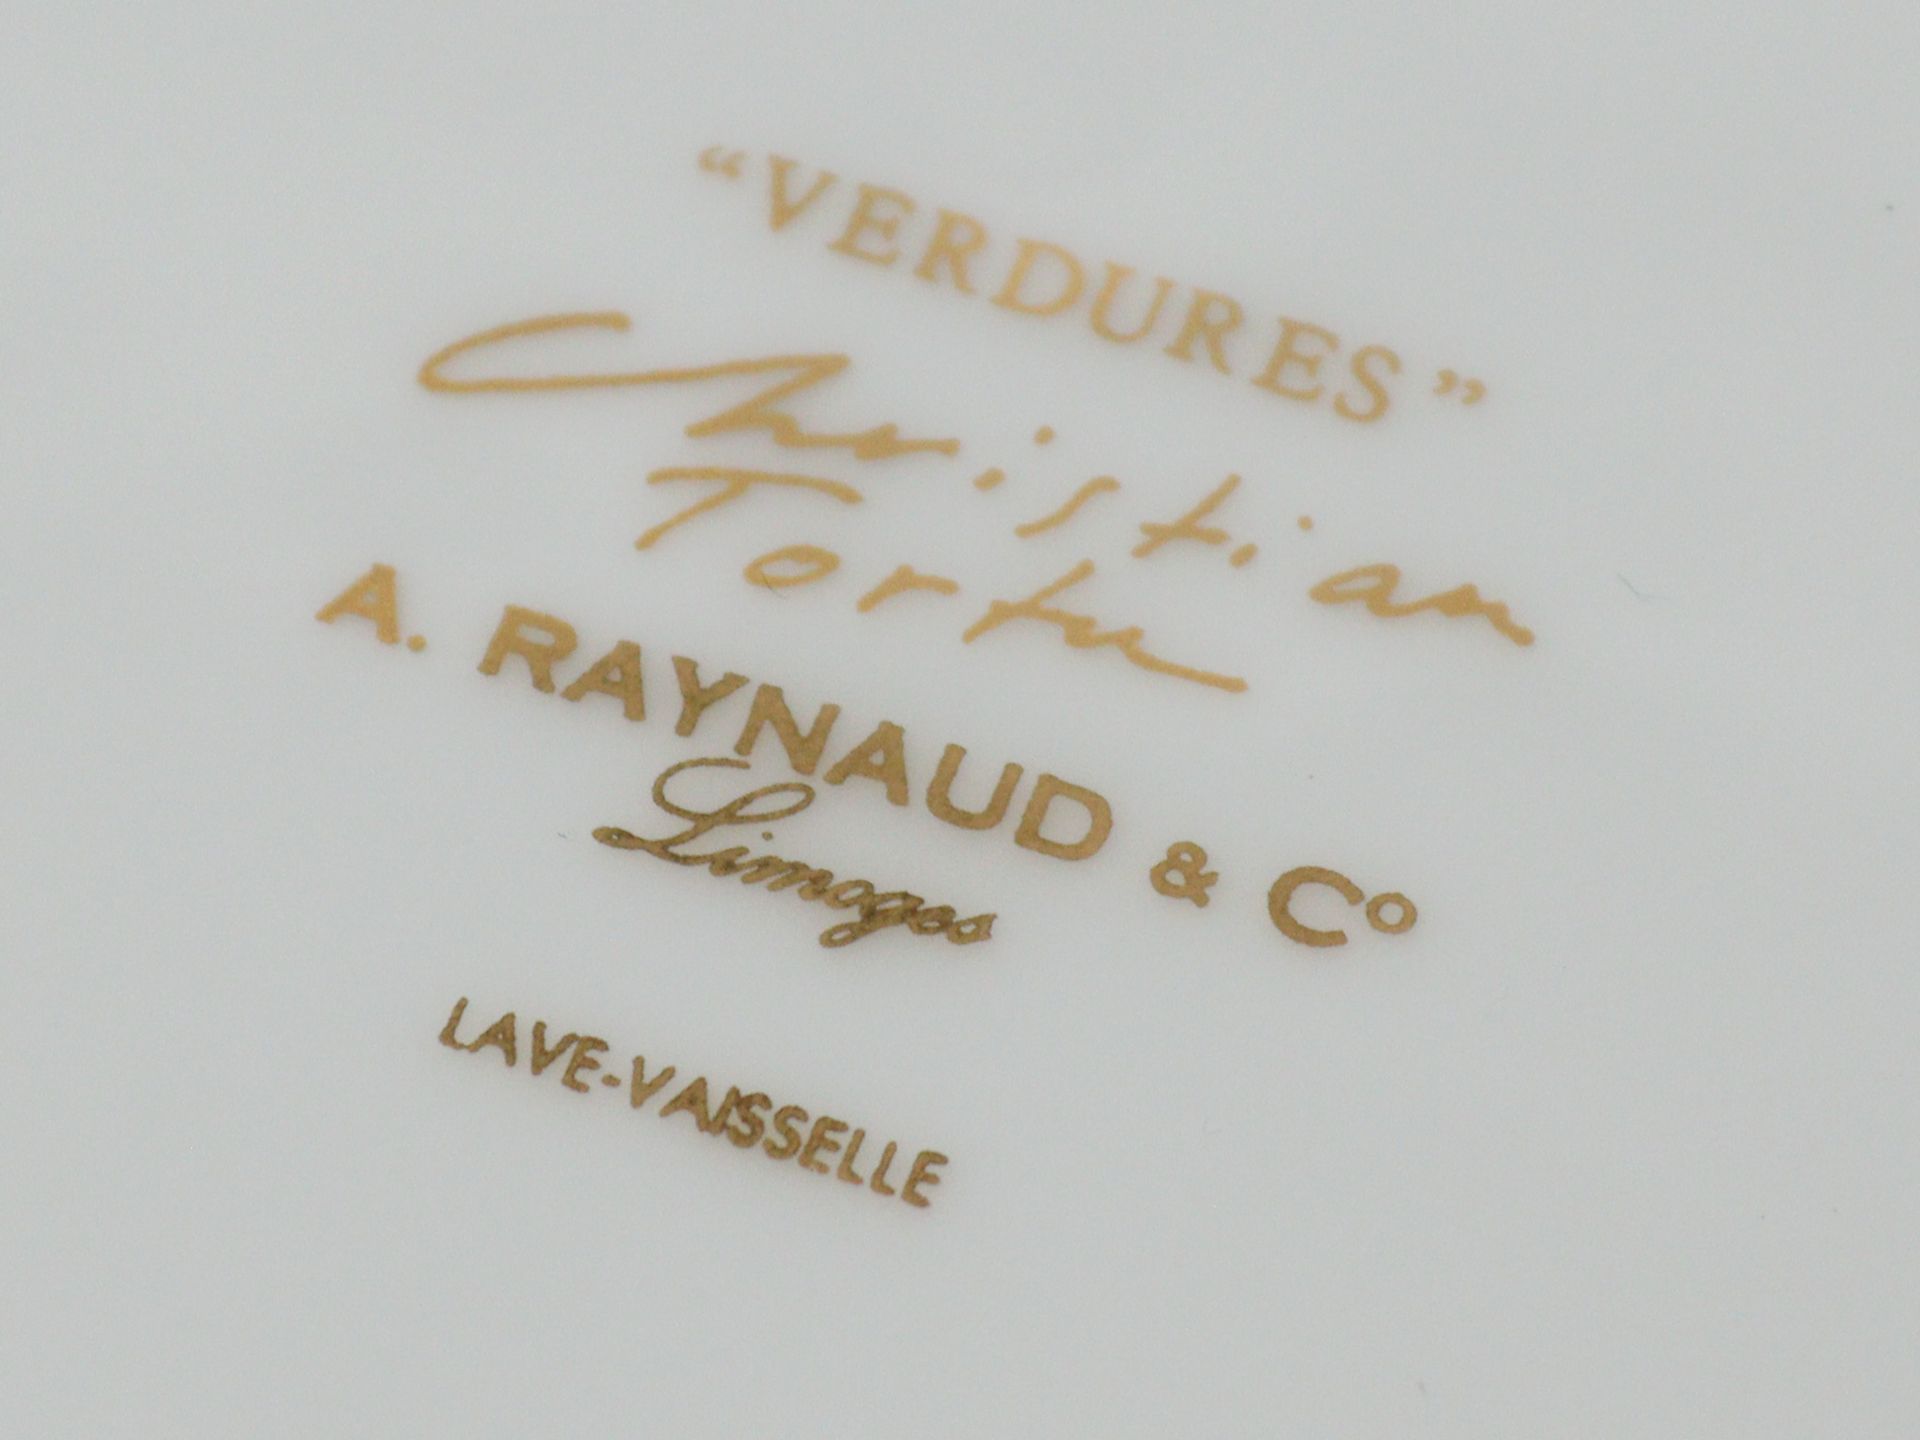 A. Raynaud & Co - Teller - Image 6 of 7